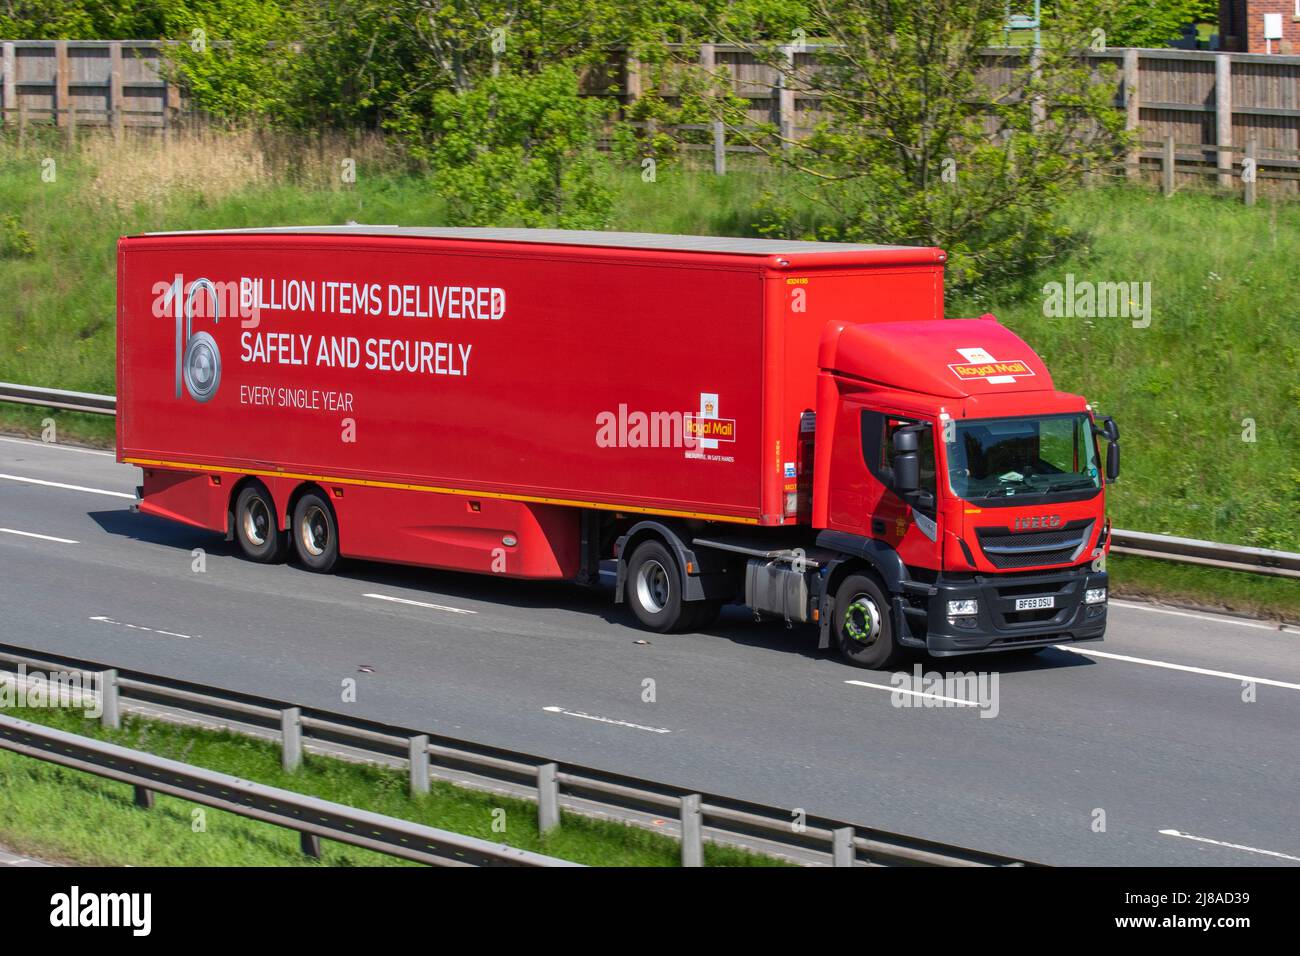 Royal Mail Haulage delivery trucks, lorry, transportation, truck, cargo carrier, DAF vehicle, European commercial transport, industry, M6 at Manchester, UK Stock Photo